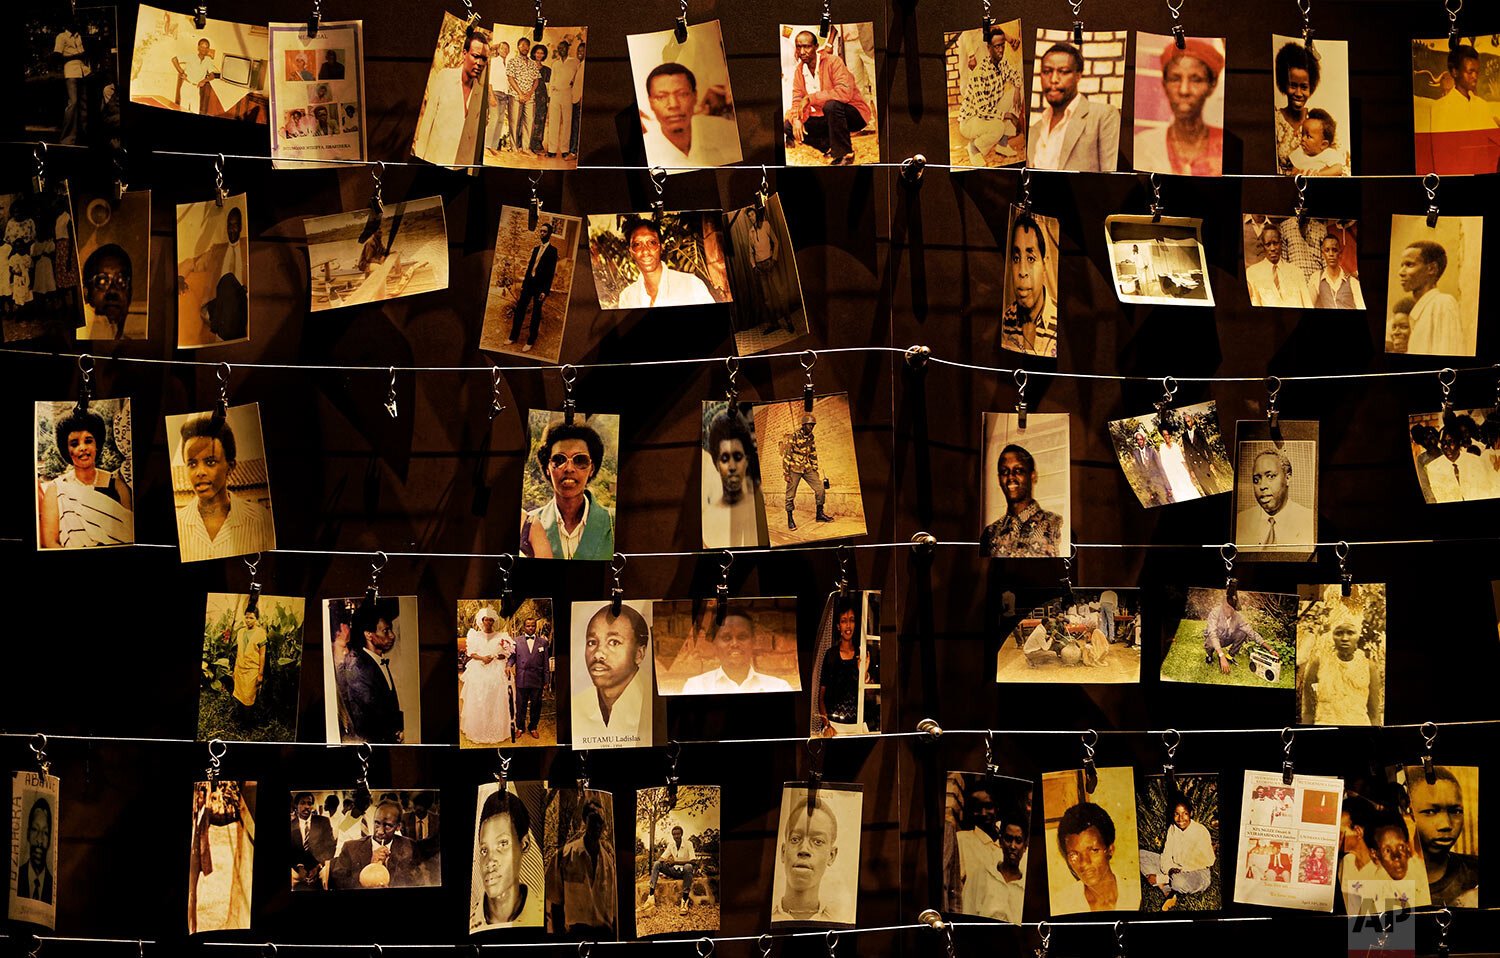 Family photos of some of those who died at the Kigali Genocide Memorial center in the Kigali, Rwanda commemorating the 25th anniversary of 800,000 Tutsis and moderate Hutus massacred by the majority Hutu population over a 100-day period in what was the worst genocide in recent history 